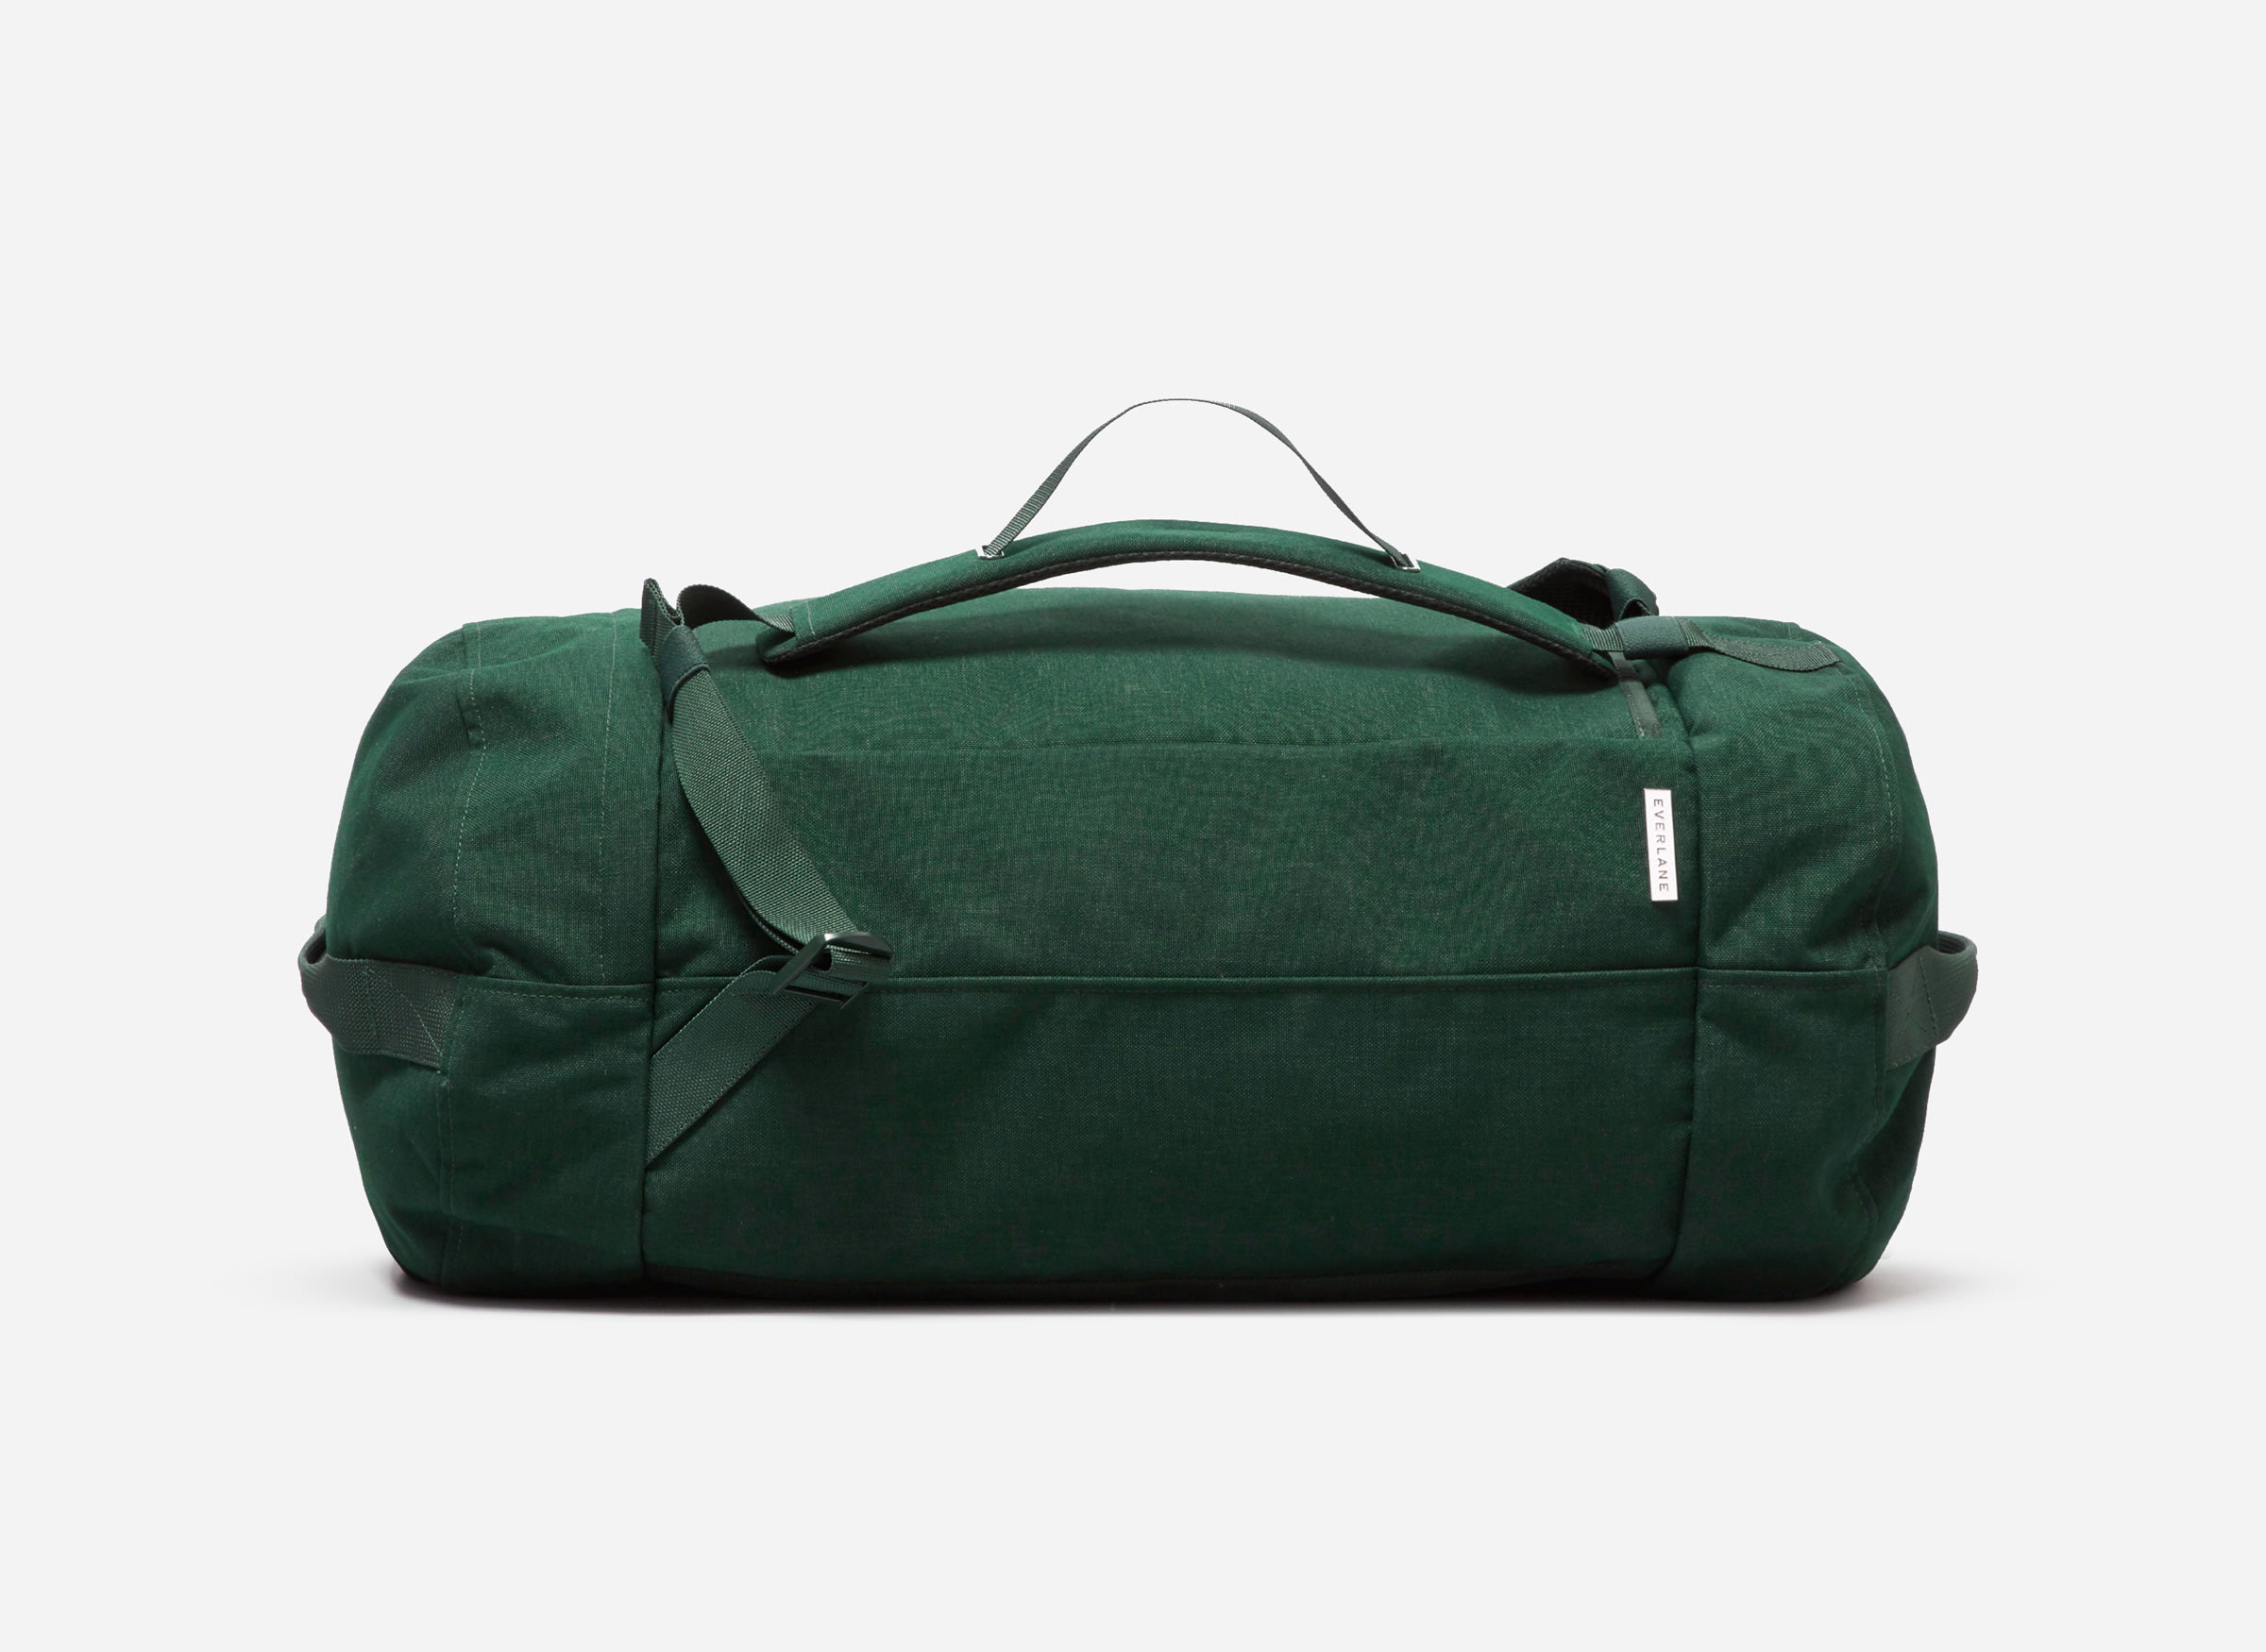 The Mover Pack from Everlane